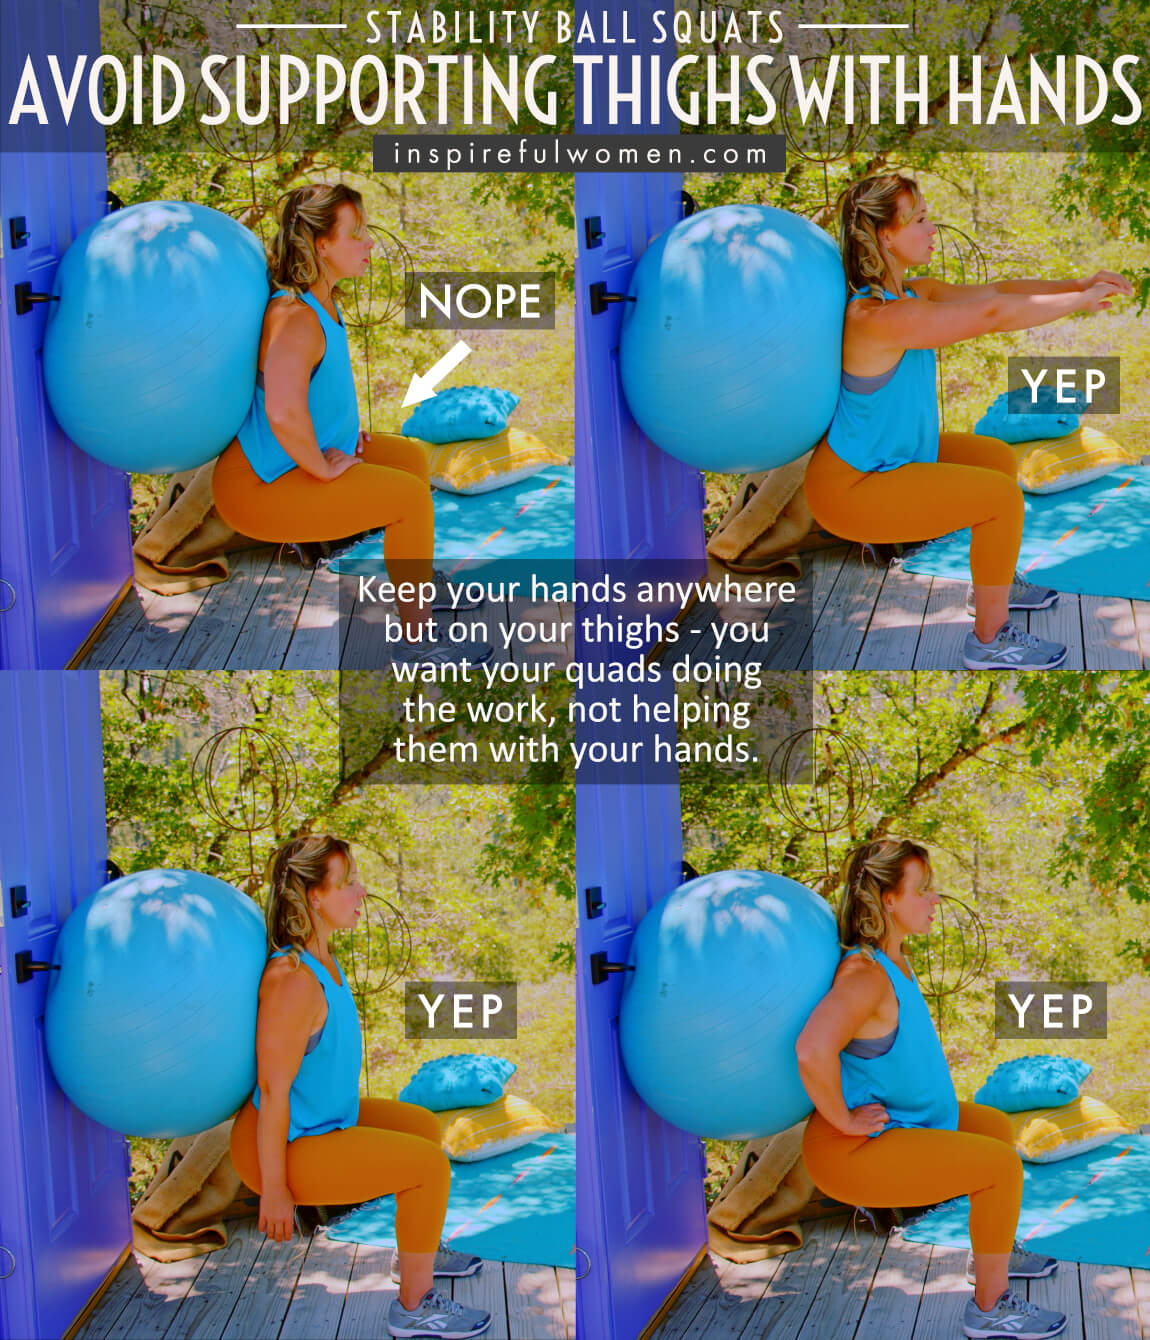 avoid-supporting-thighs-with-hands-stability-ball-squats-common-mistakes